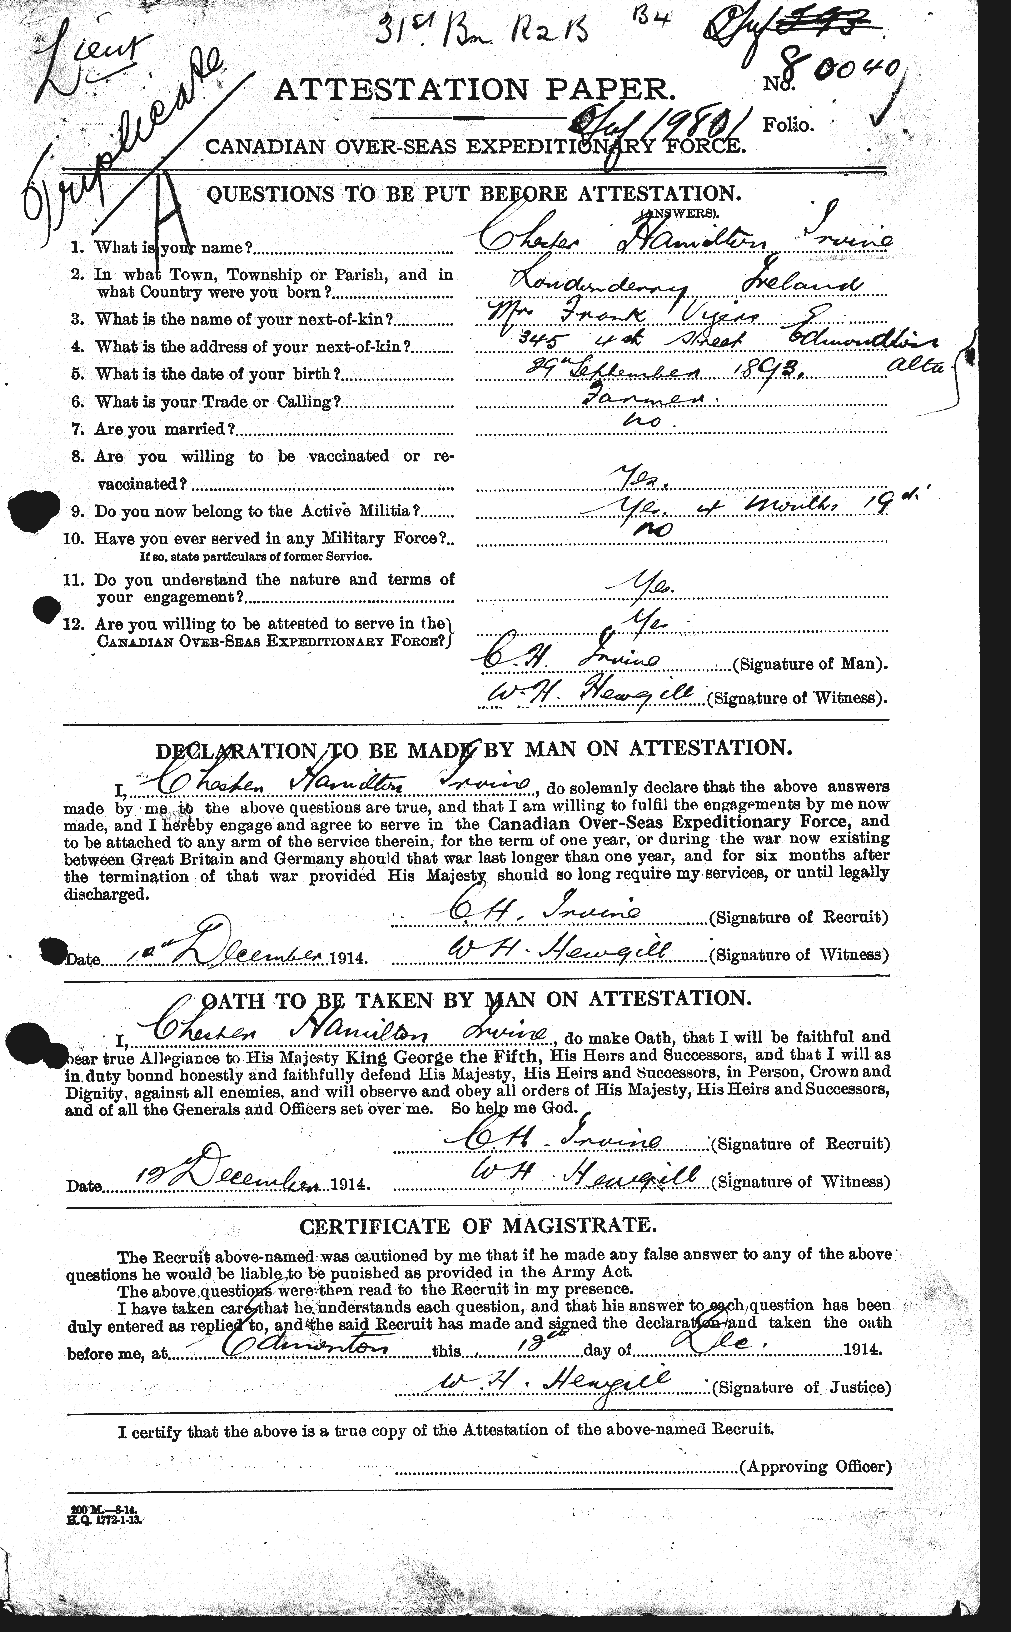 Personnel Records of the First World War - CEF 410419a